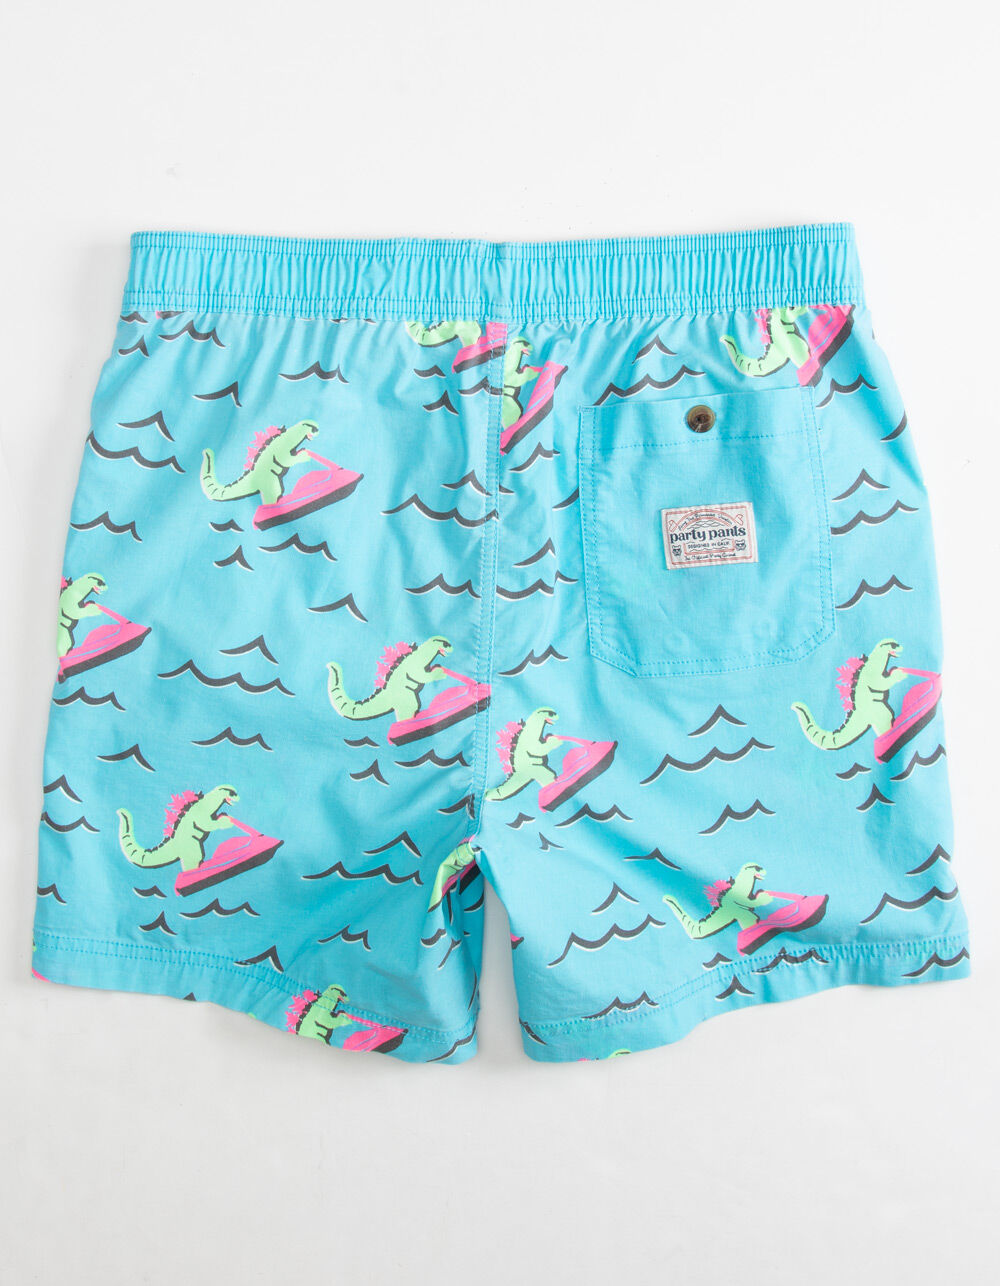 PARTY PANTS Rip Zilla Mens Volley Shorts - ELECTRIC BLUE | Tillys